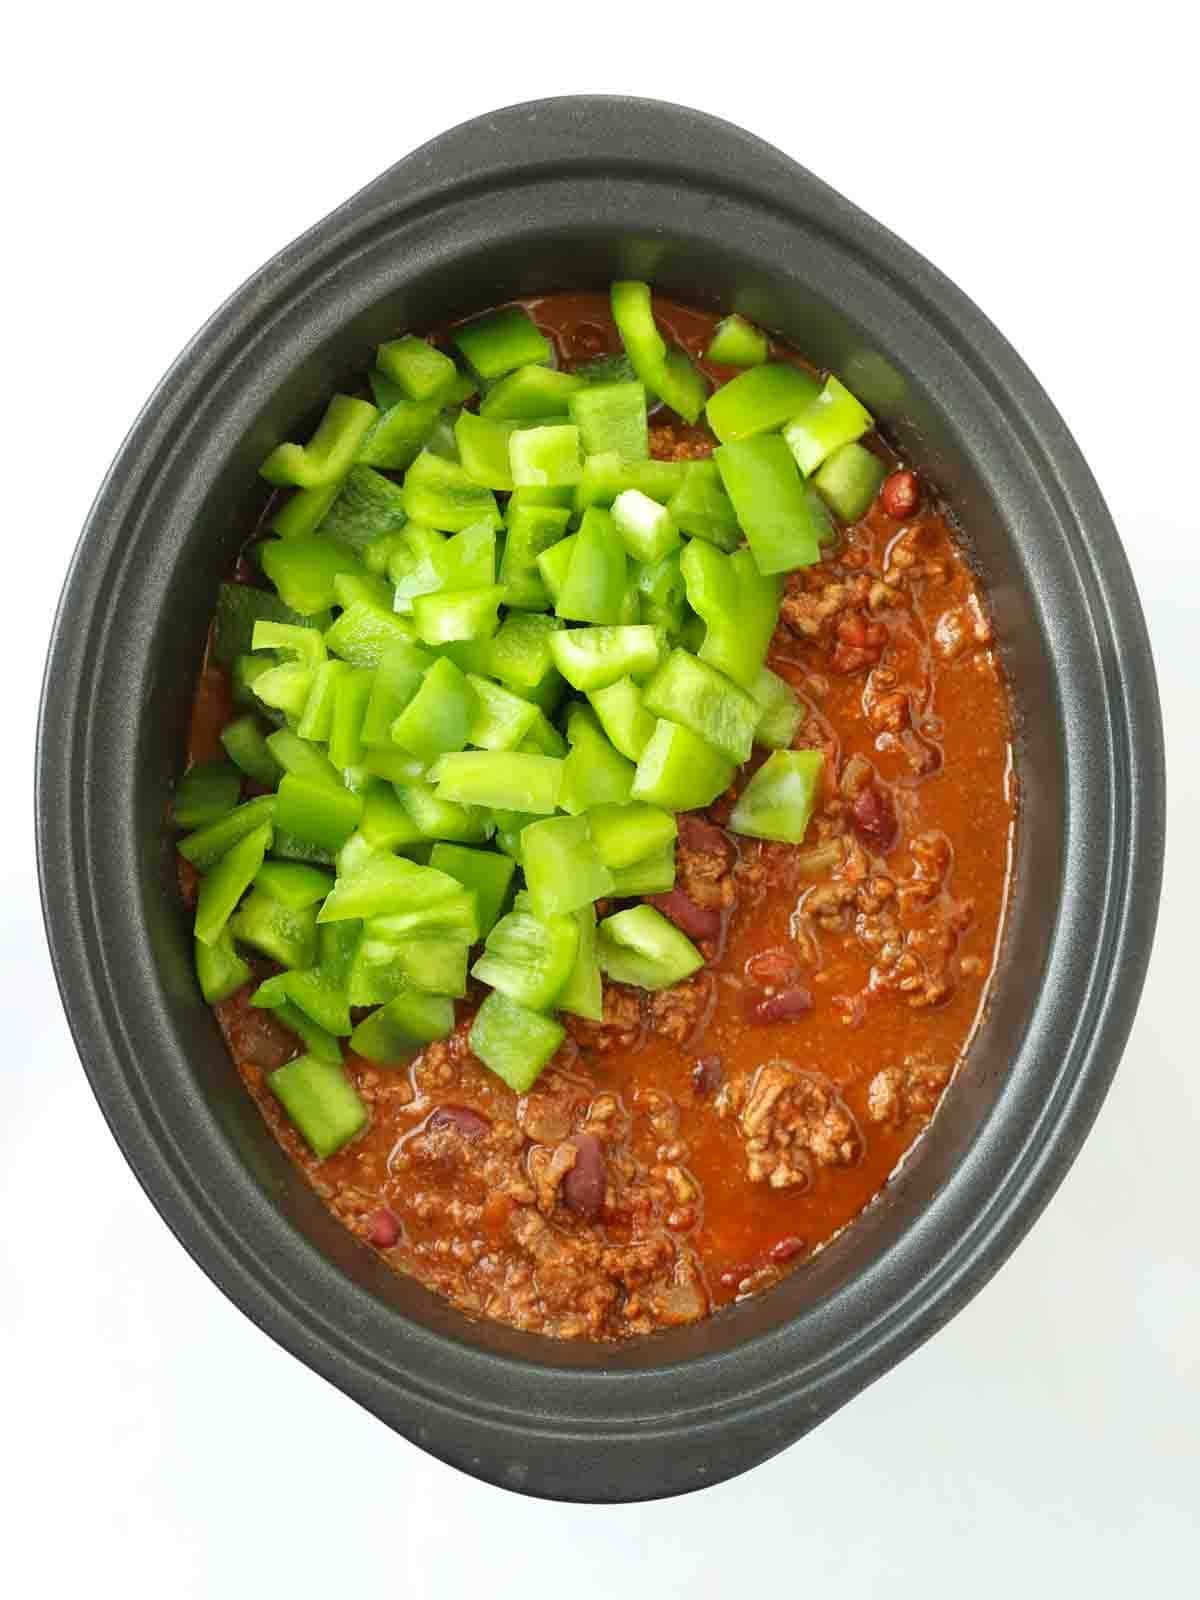 A slow cooker pan filled with slow cooker chilli, with raw green peppers on top, ready to go in.